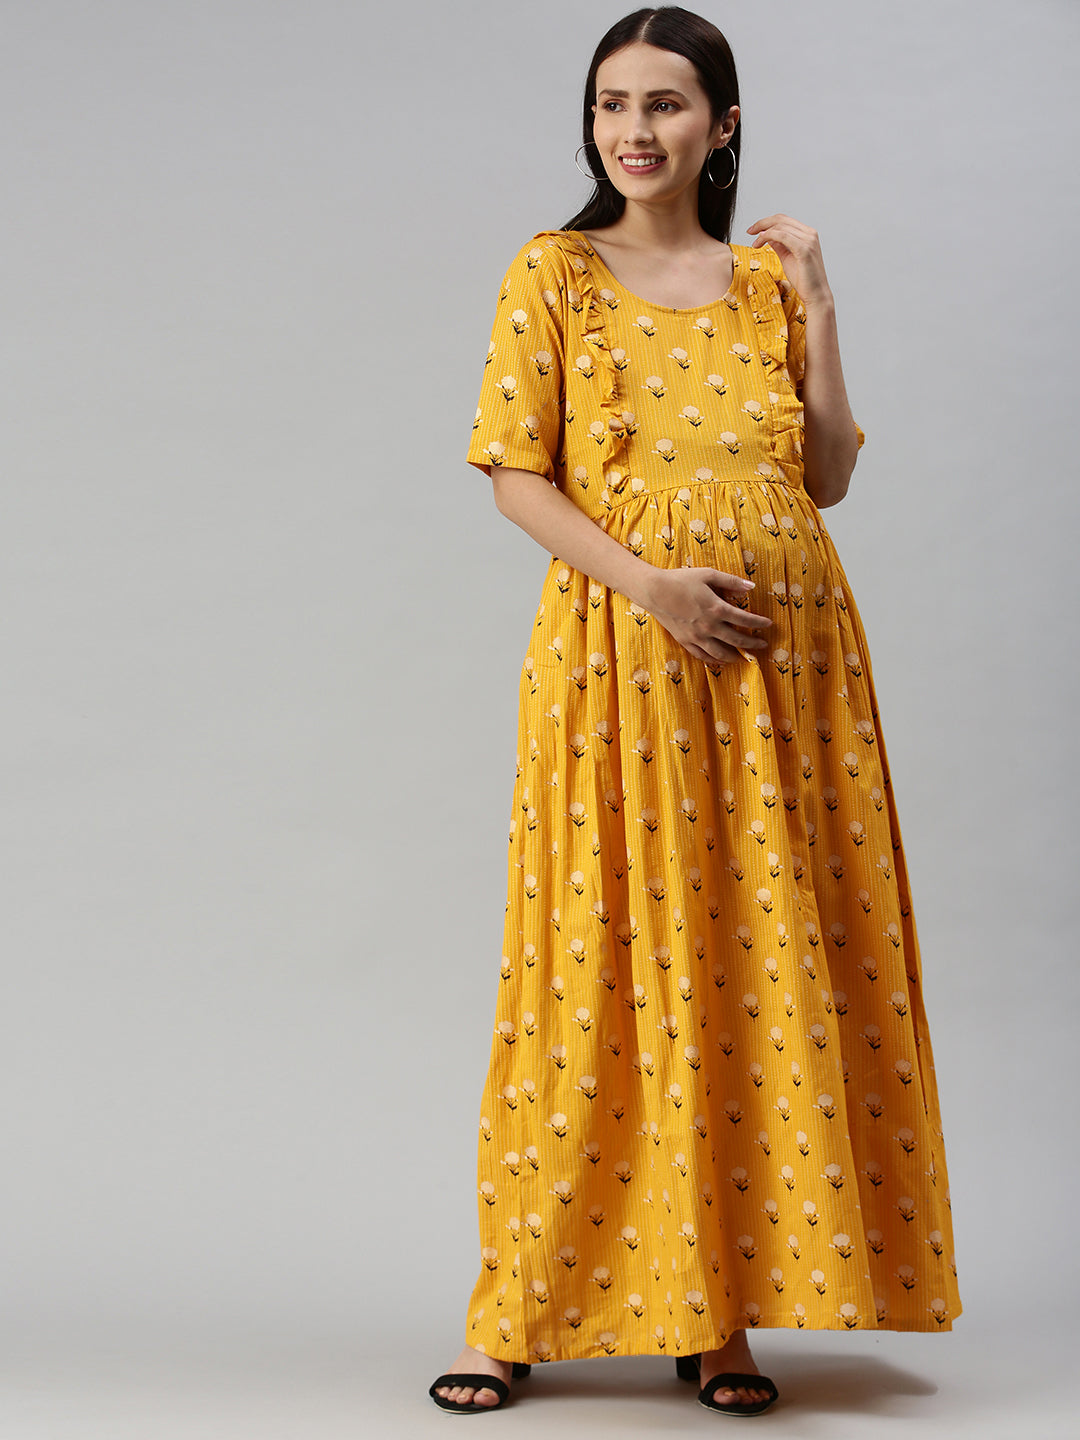 MAFE Blue & Yellow Floral Maternity Maxi Dress - Absolutely Desi